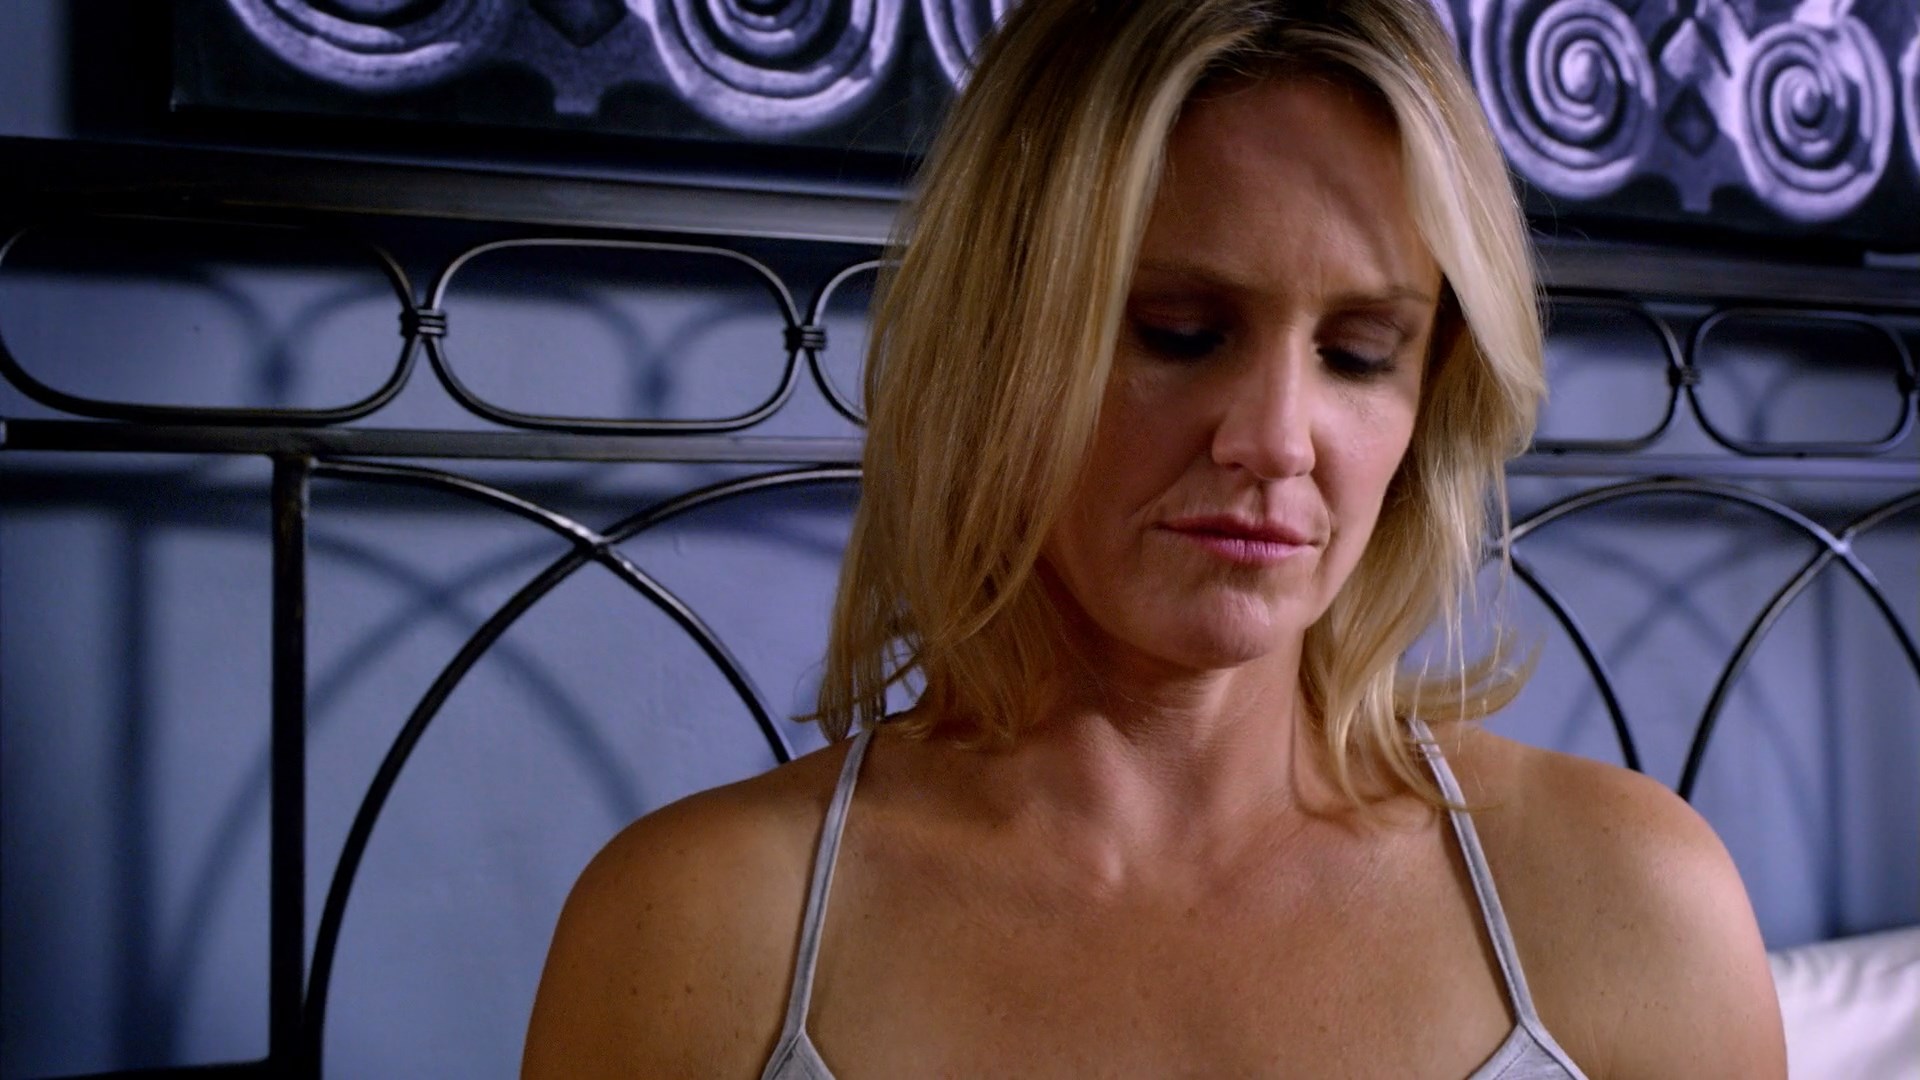 Sherry Stringfield looks sexxxy when she is sitting on bed in tanktop and p...